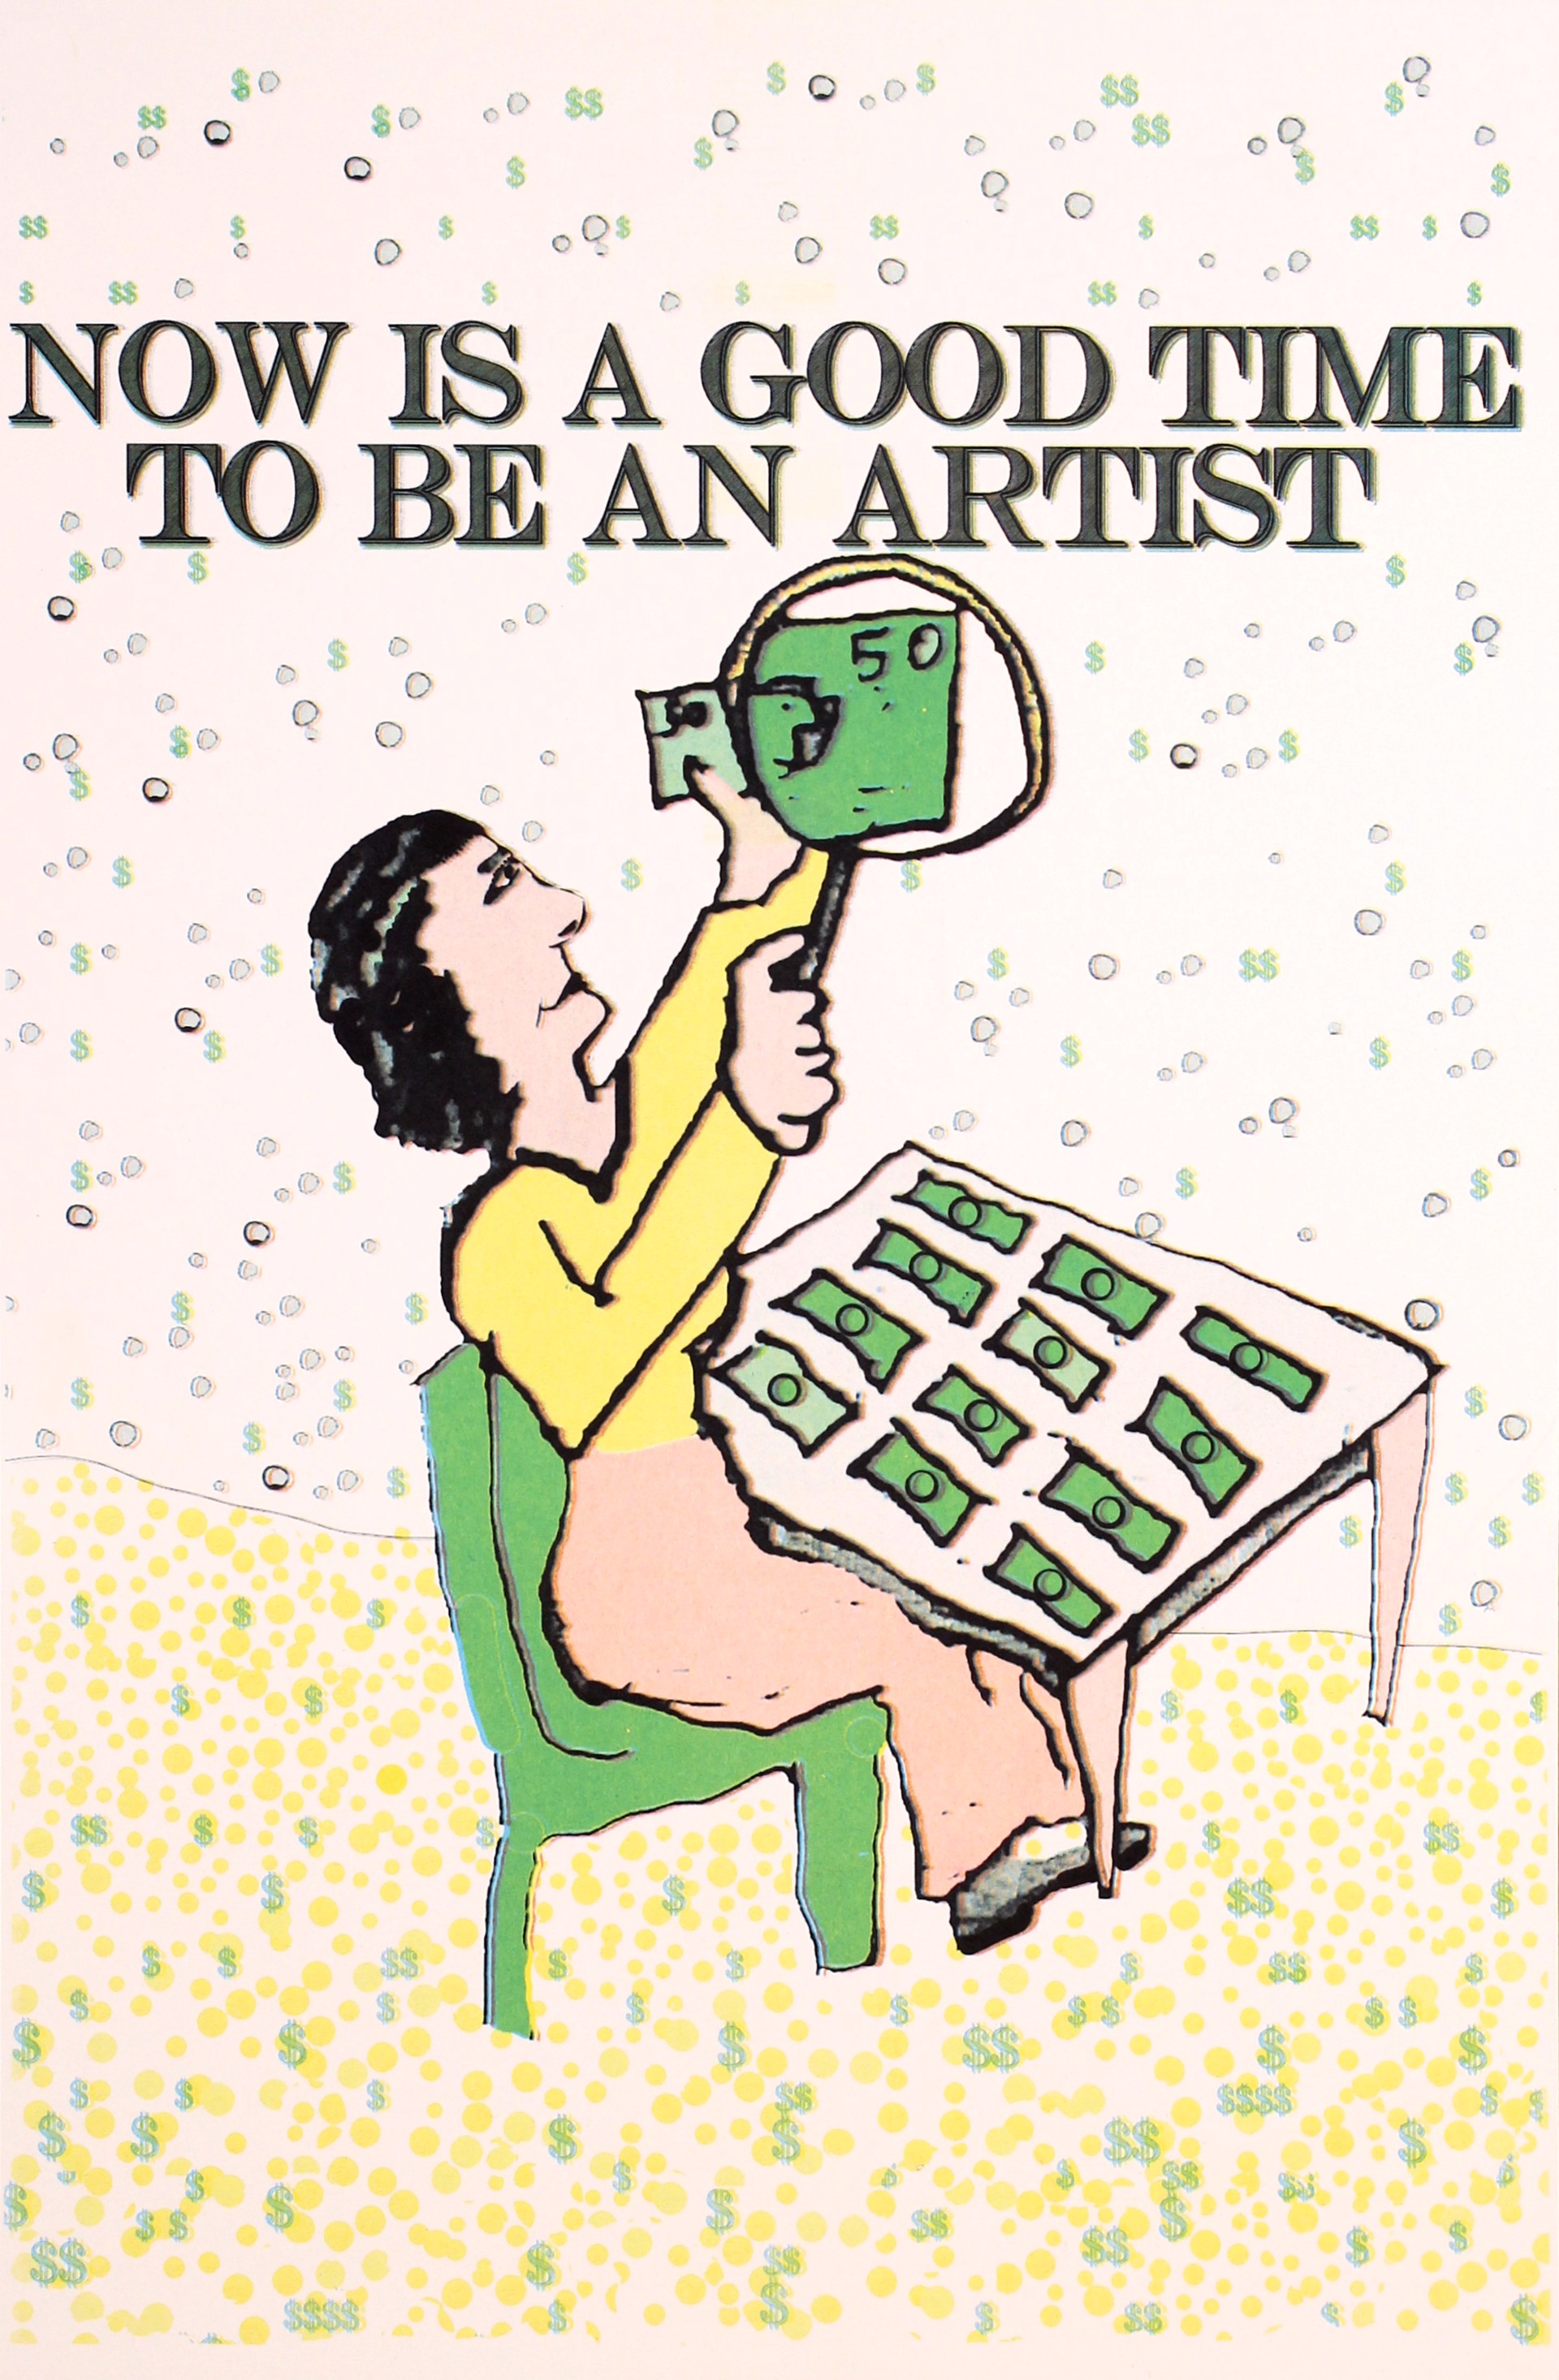 Now is a Good Time to be an Artist by Jerry Wellman